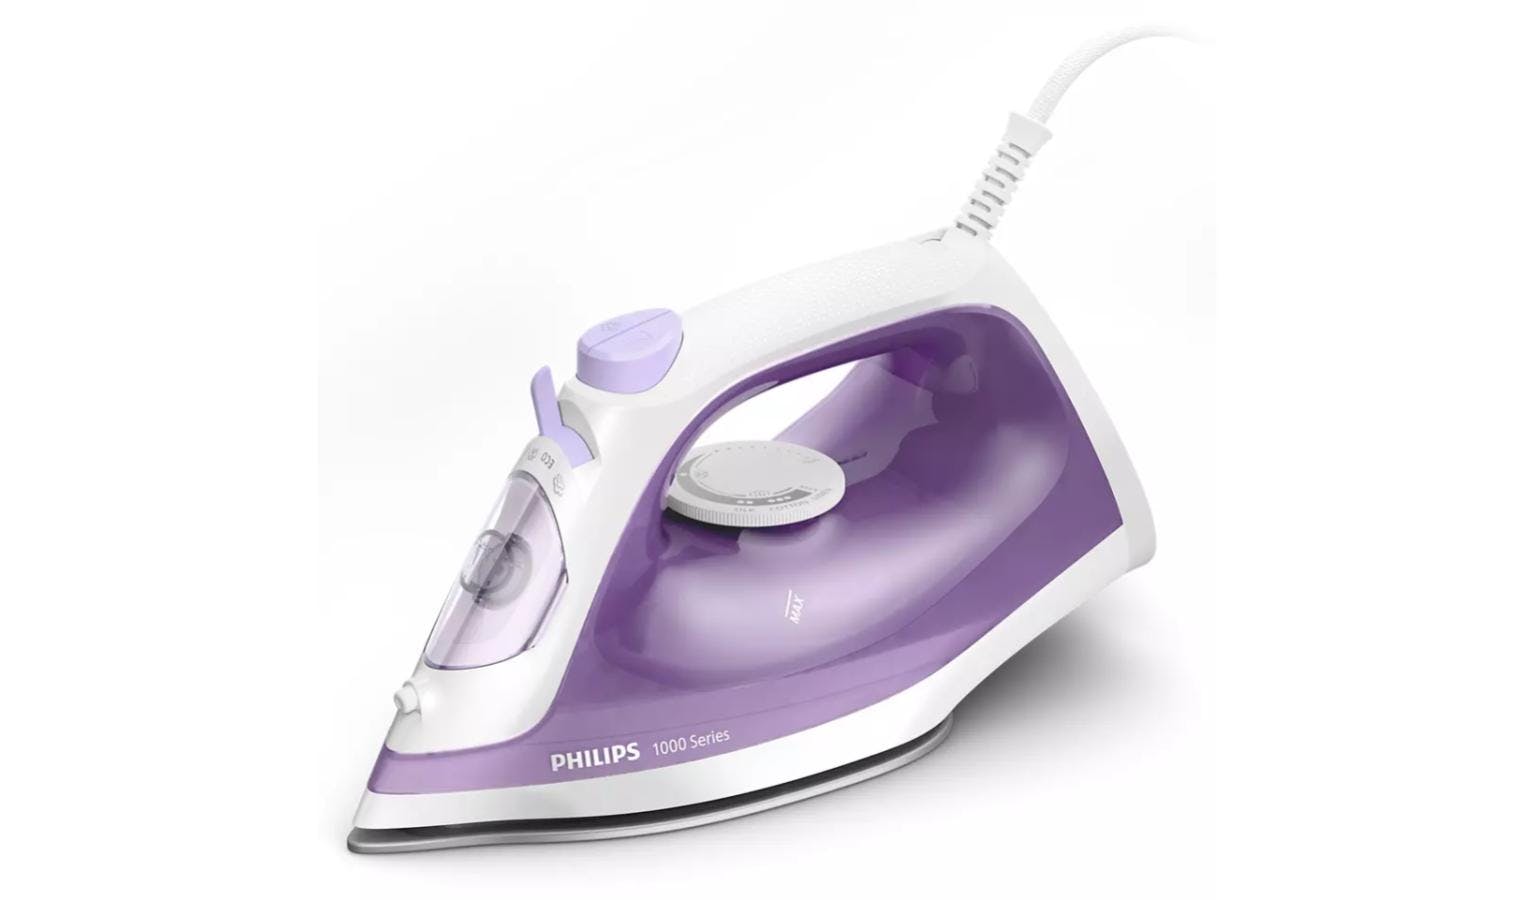 https://hnsgsfp.imgix.net/9/images/detailed/90/philips-1000-series-steam-iron-dst-1040_1.jpg?fit=fill&bg=0FFF&w=1534&h=900&auto=format,compress